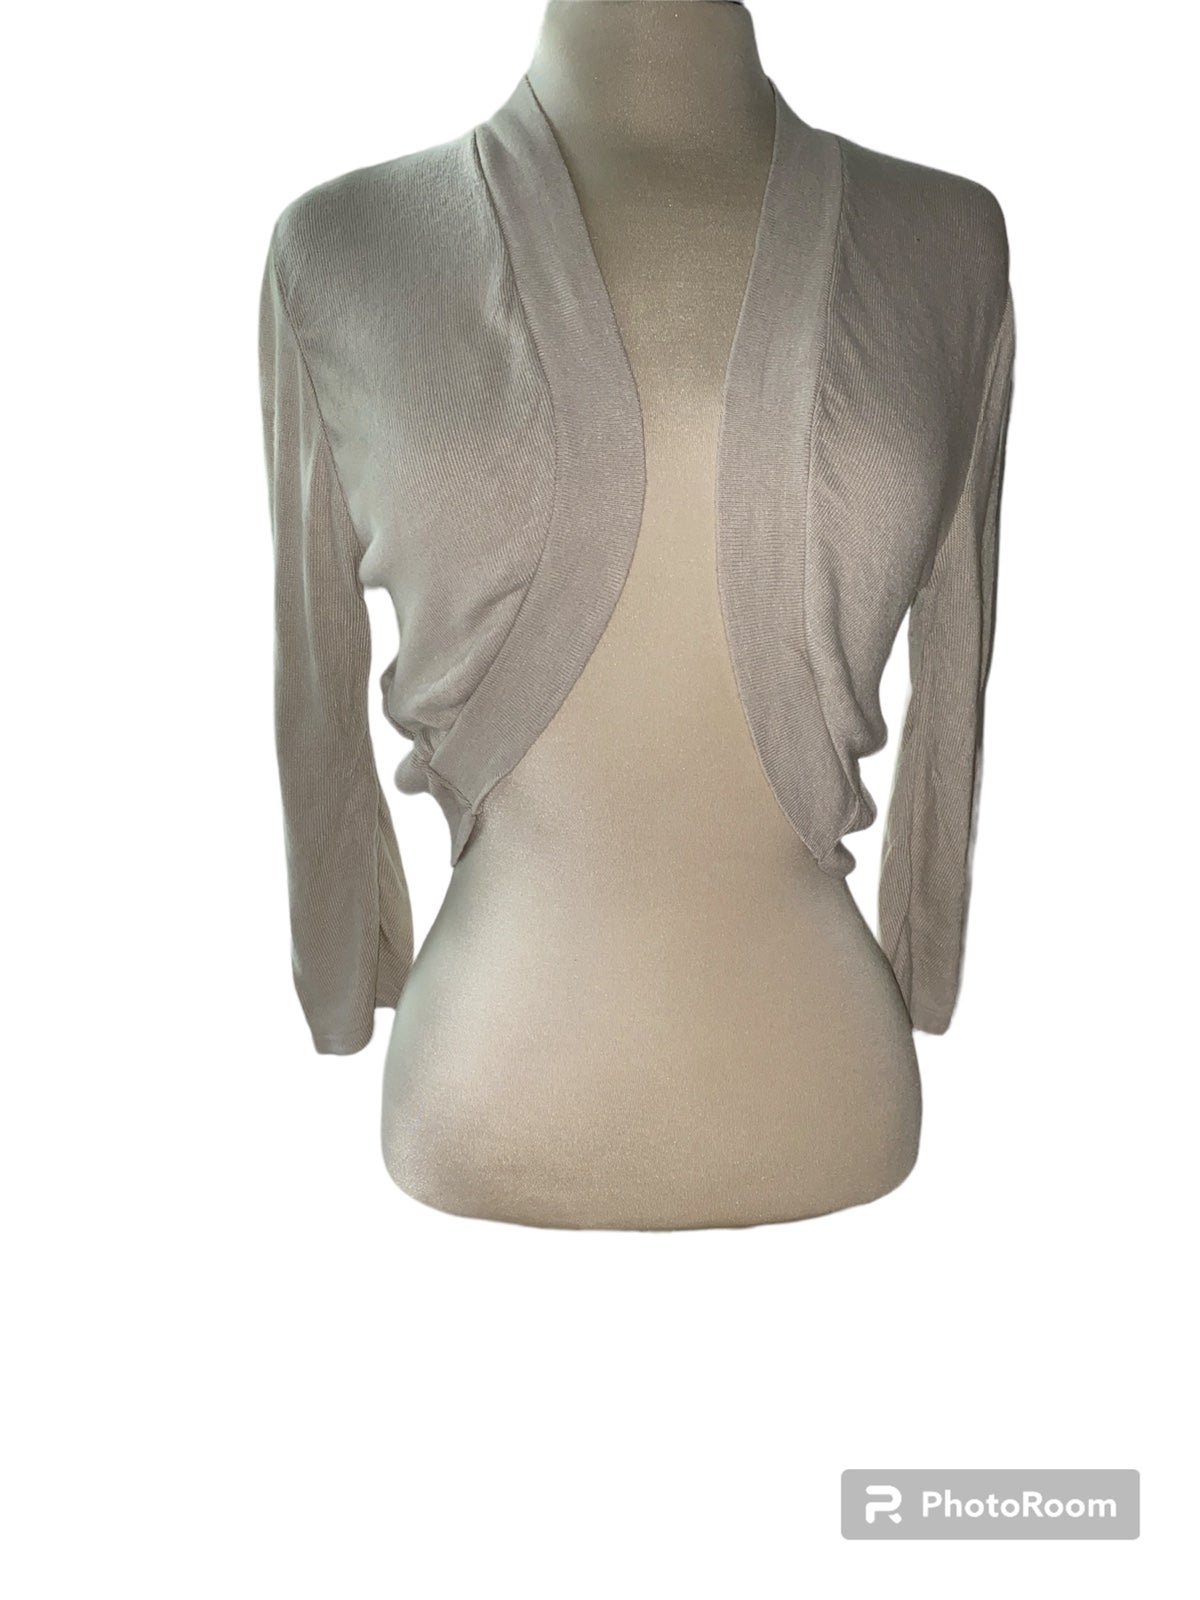 Buy Studio Y sweater cardigan short cropped style taper front 3/4” sleeves Sz large hd0dEMfe2 Factory Price